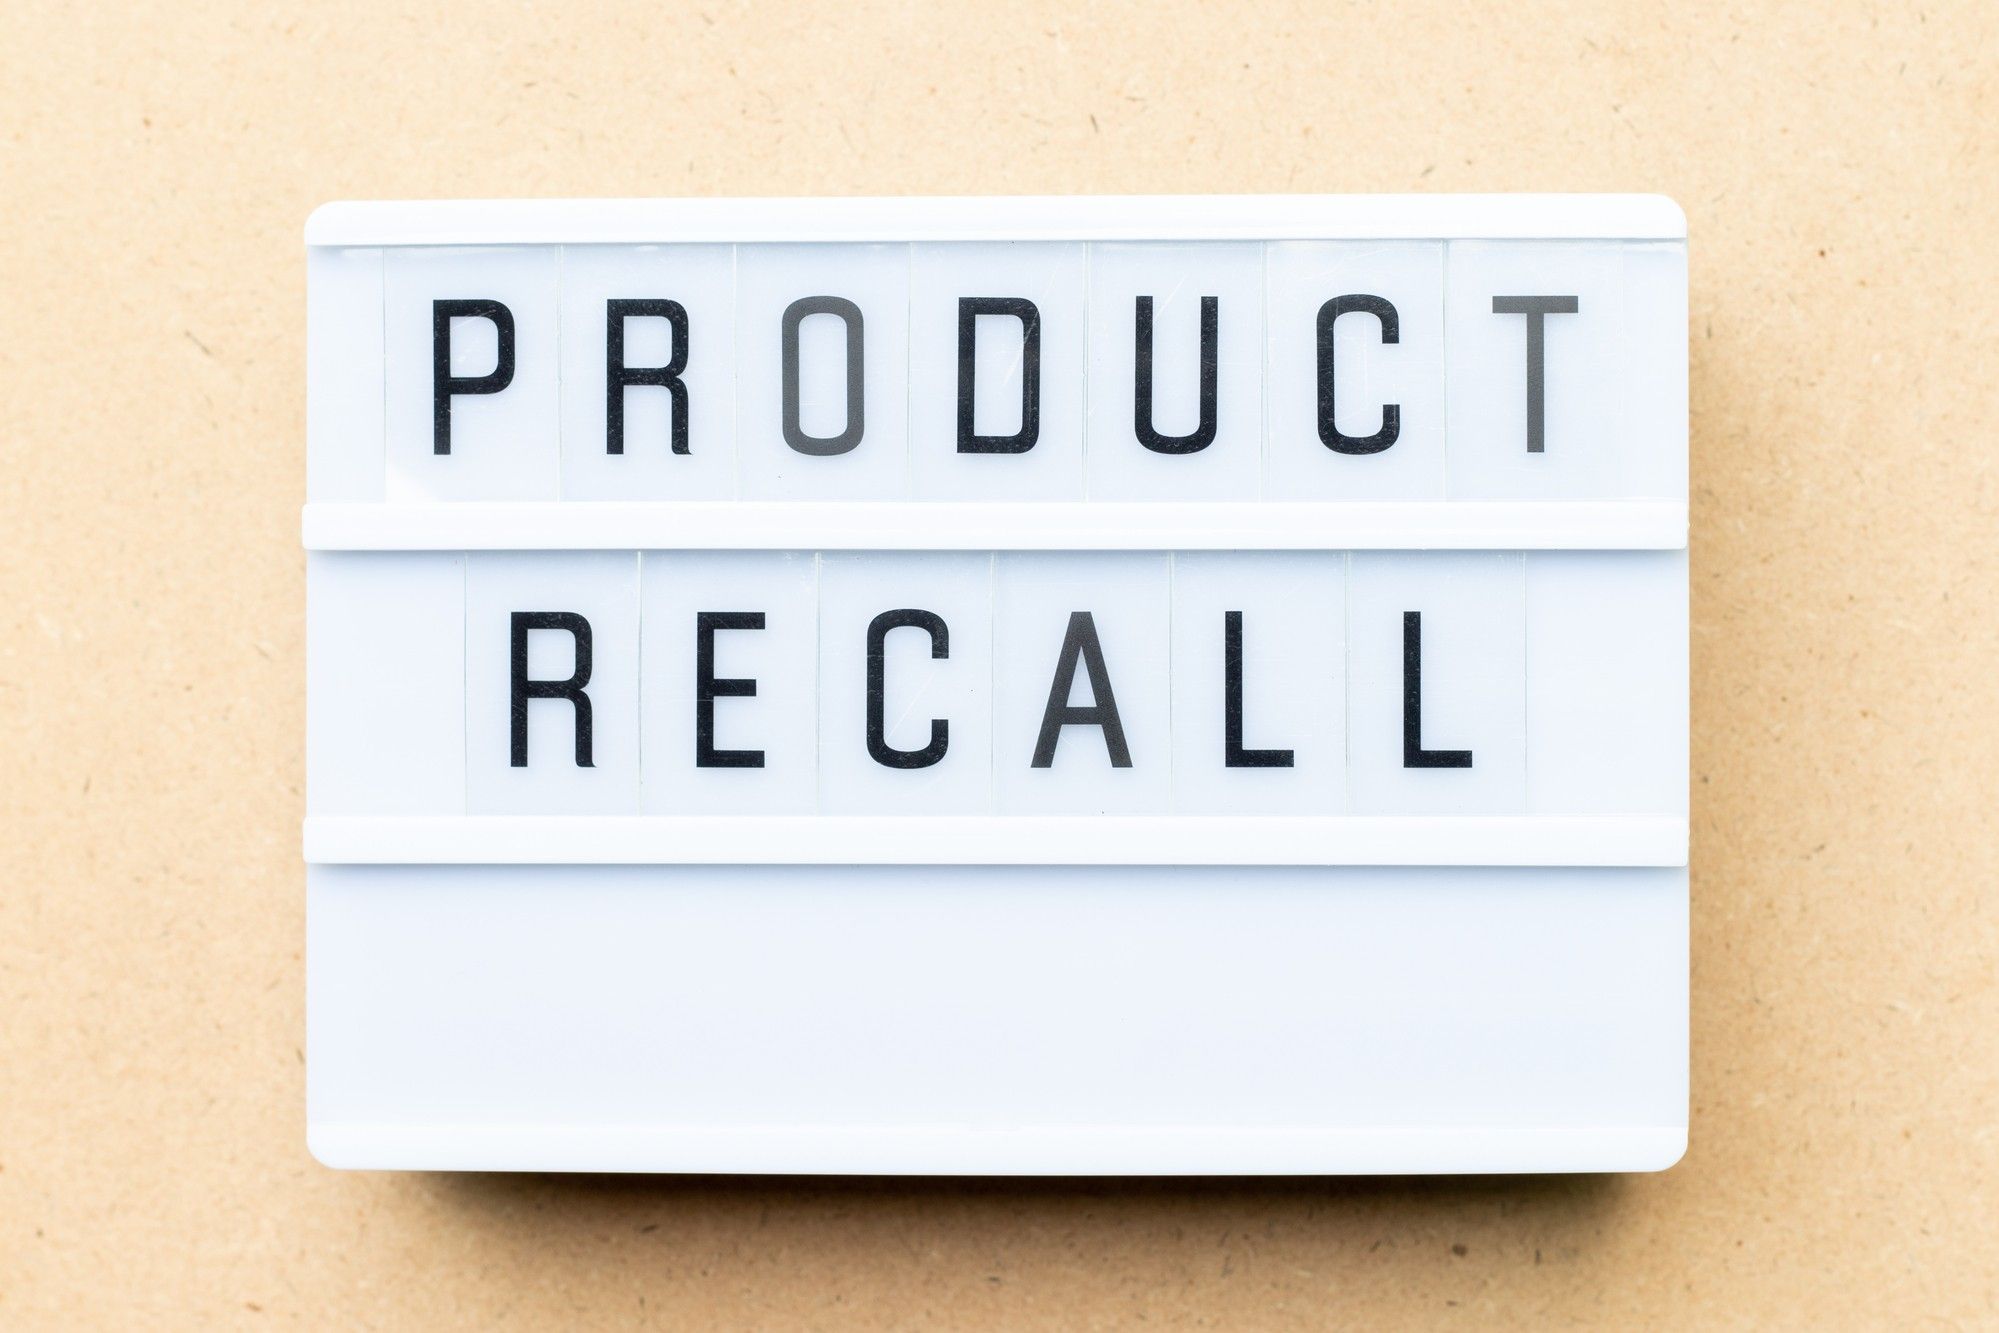 Product recall sign regarding the hazardous consumer products recalled by Health Canada